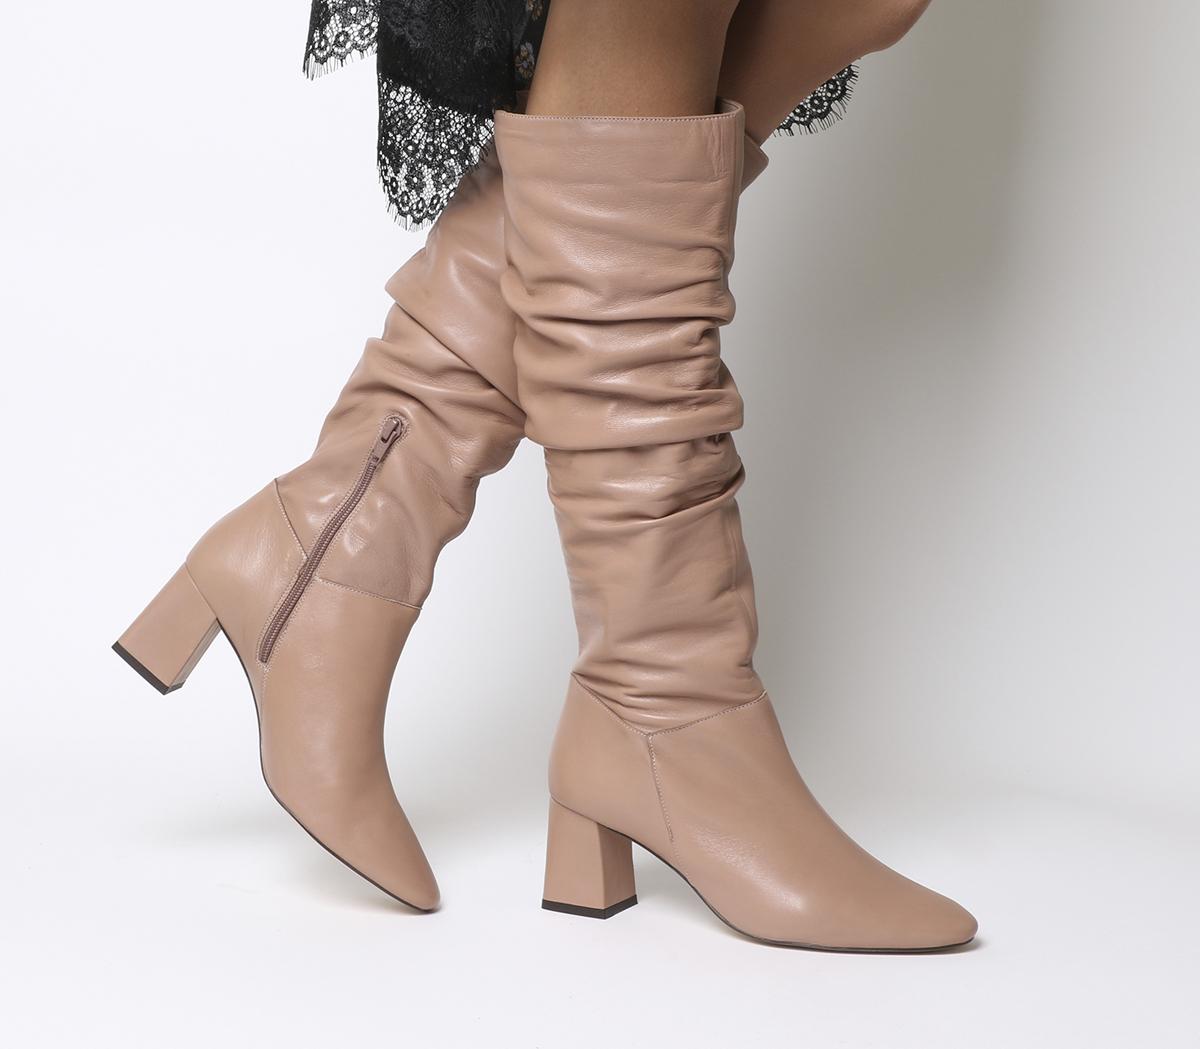 camel slouch boots